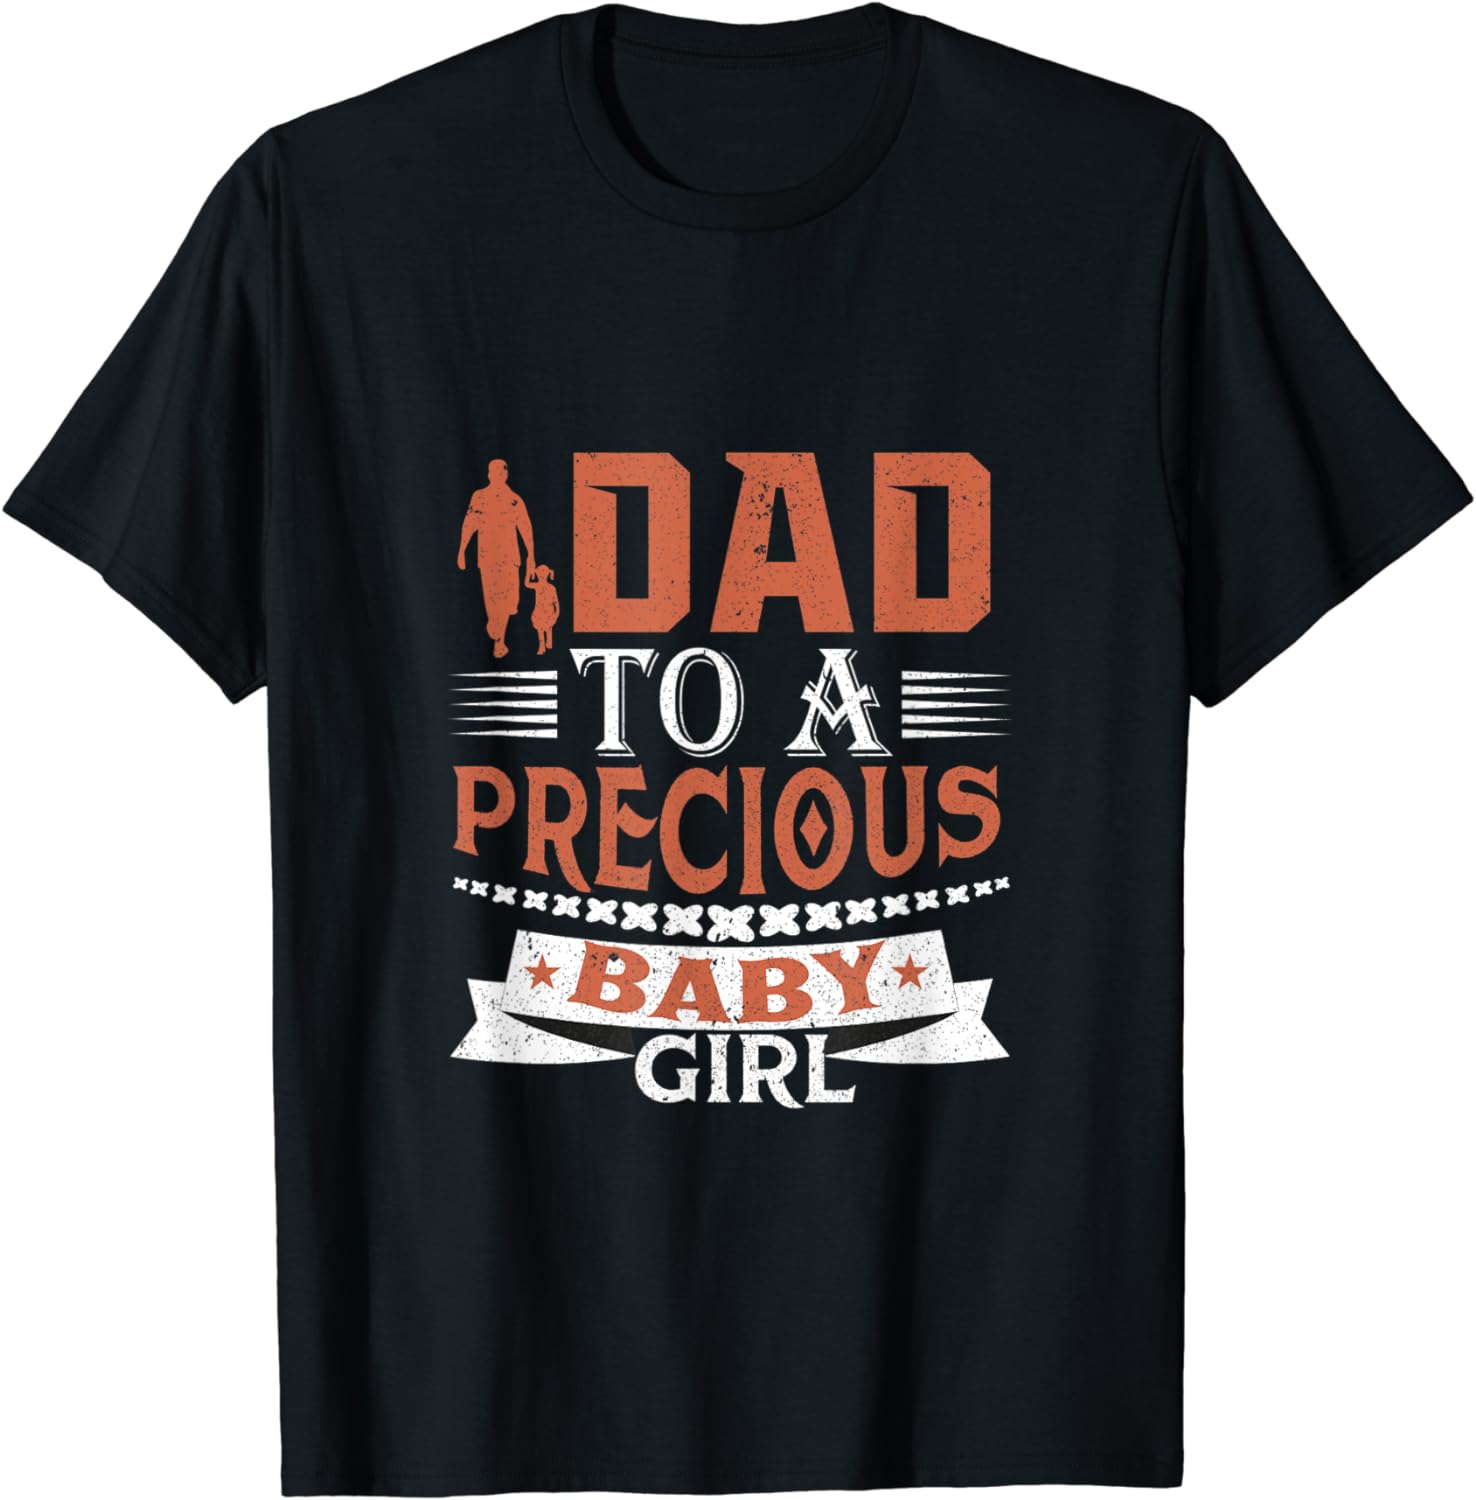 Dad To A Precious Baby Girl T-Shirt